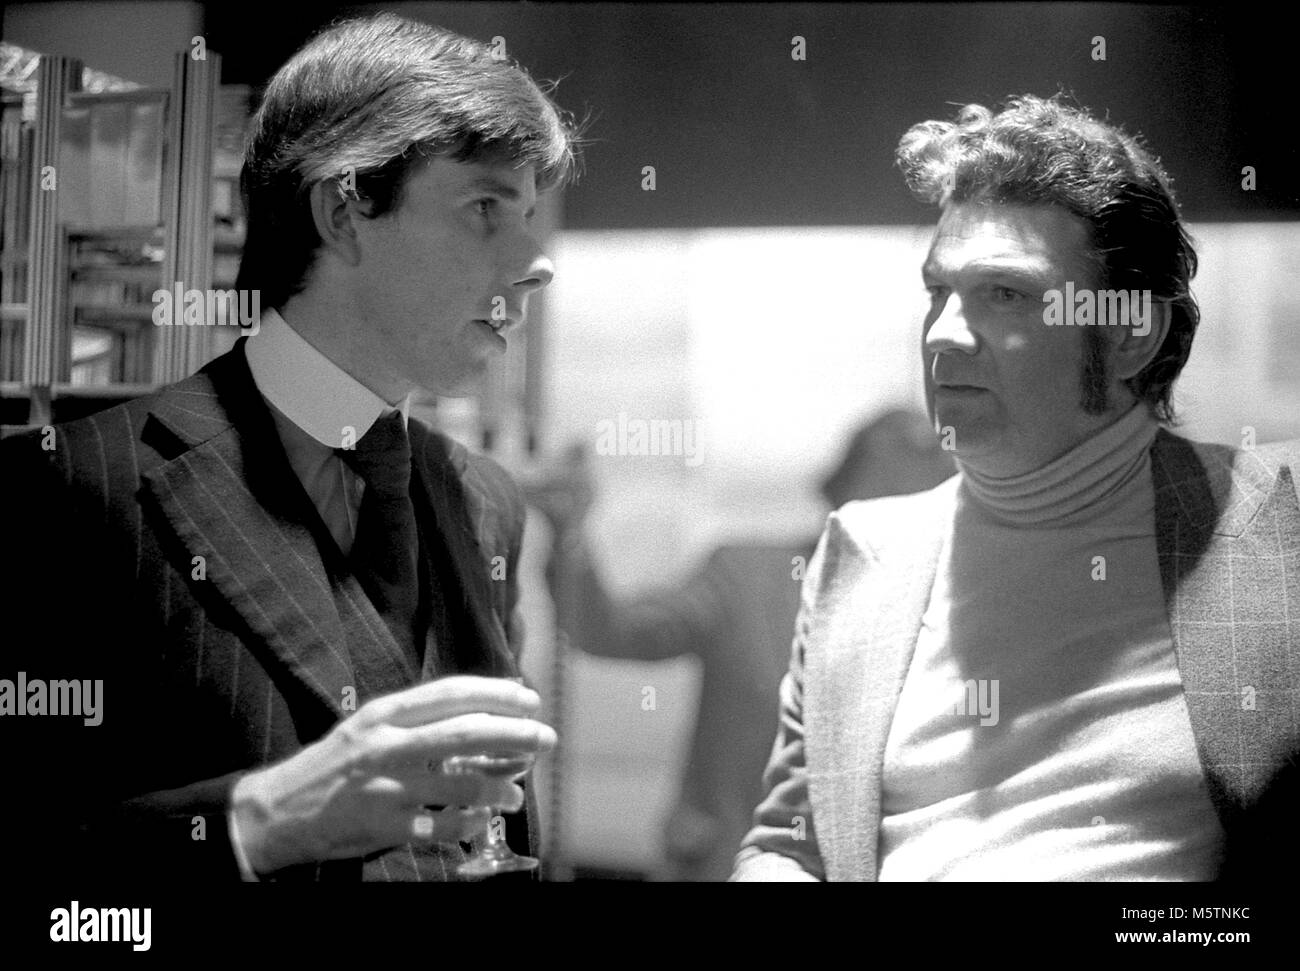 Architectural historian Gavin Stamp columnist for Private Eye magazine as Piloti, in conversation with a man at the RIBA Heinz Gallery in 1975 London UK  KATHY DEWITT Stock Photo